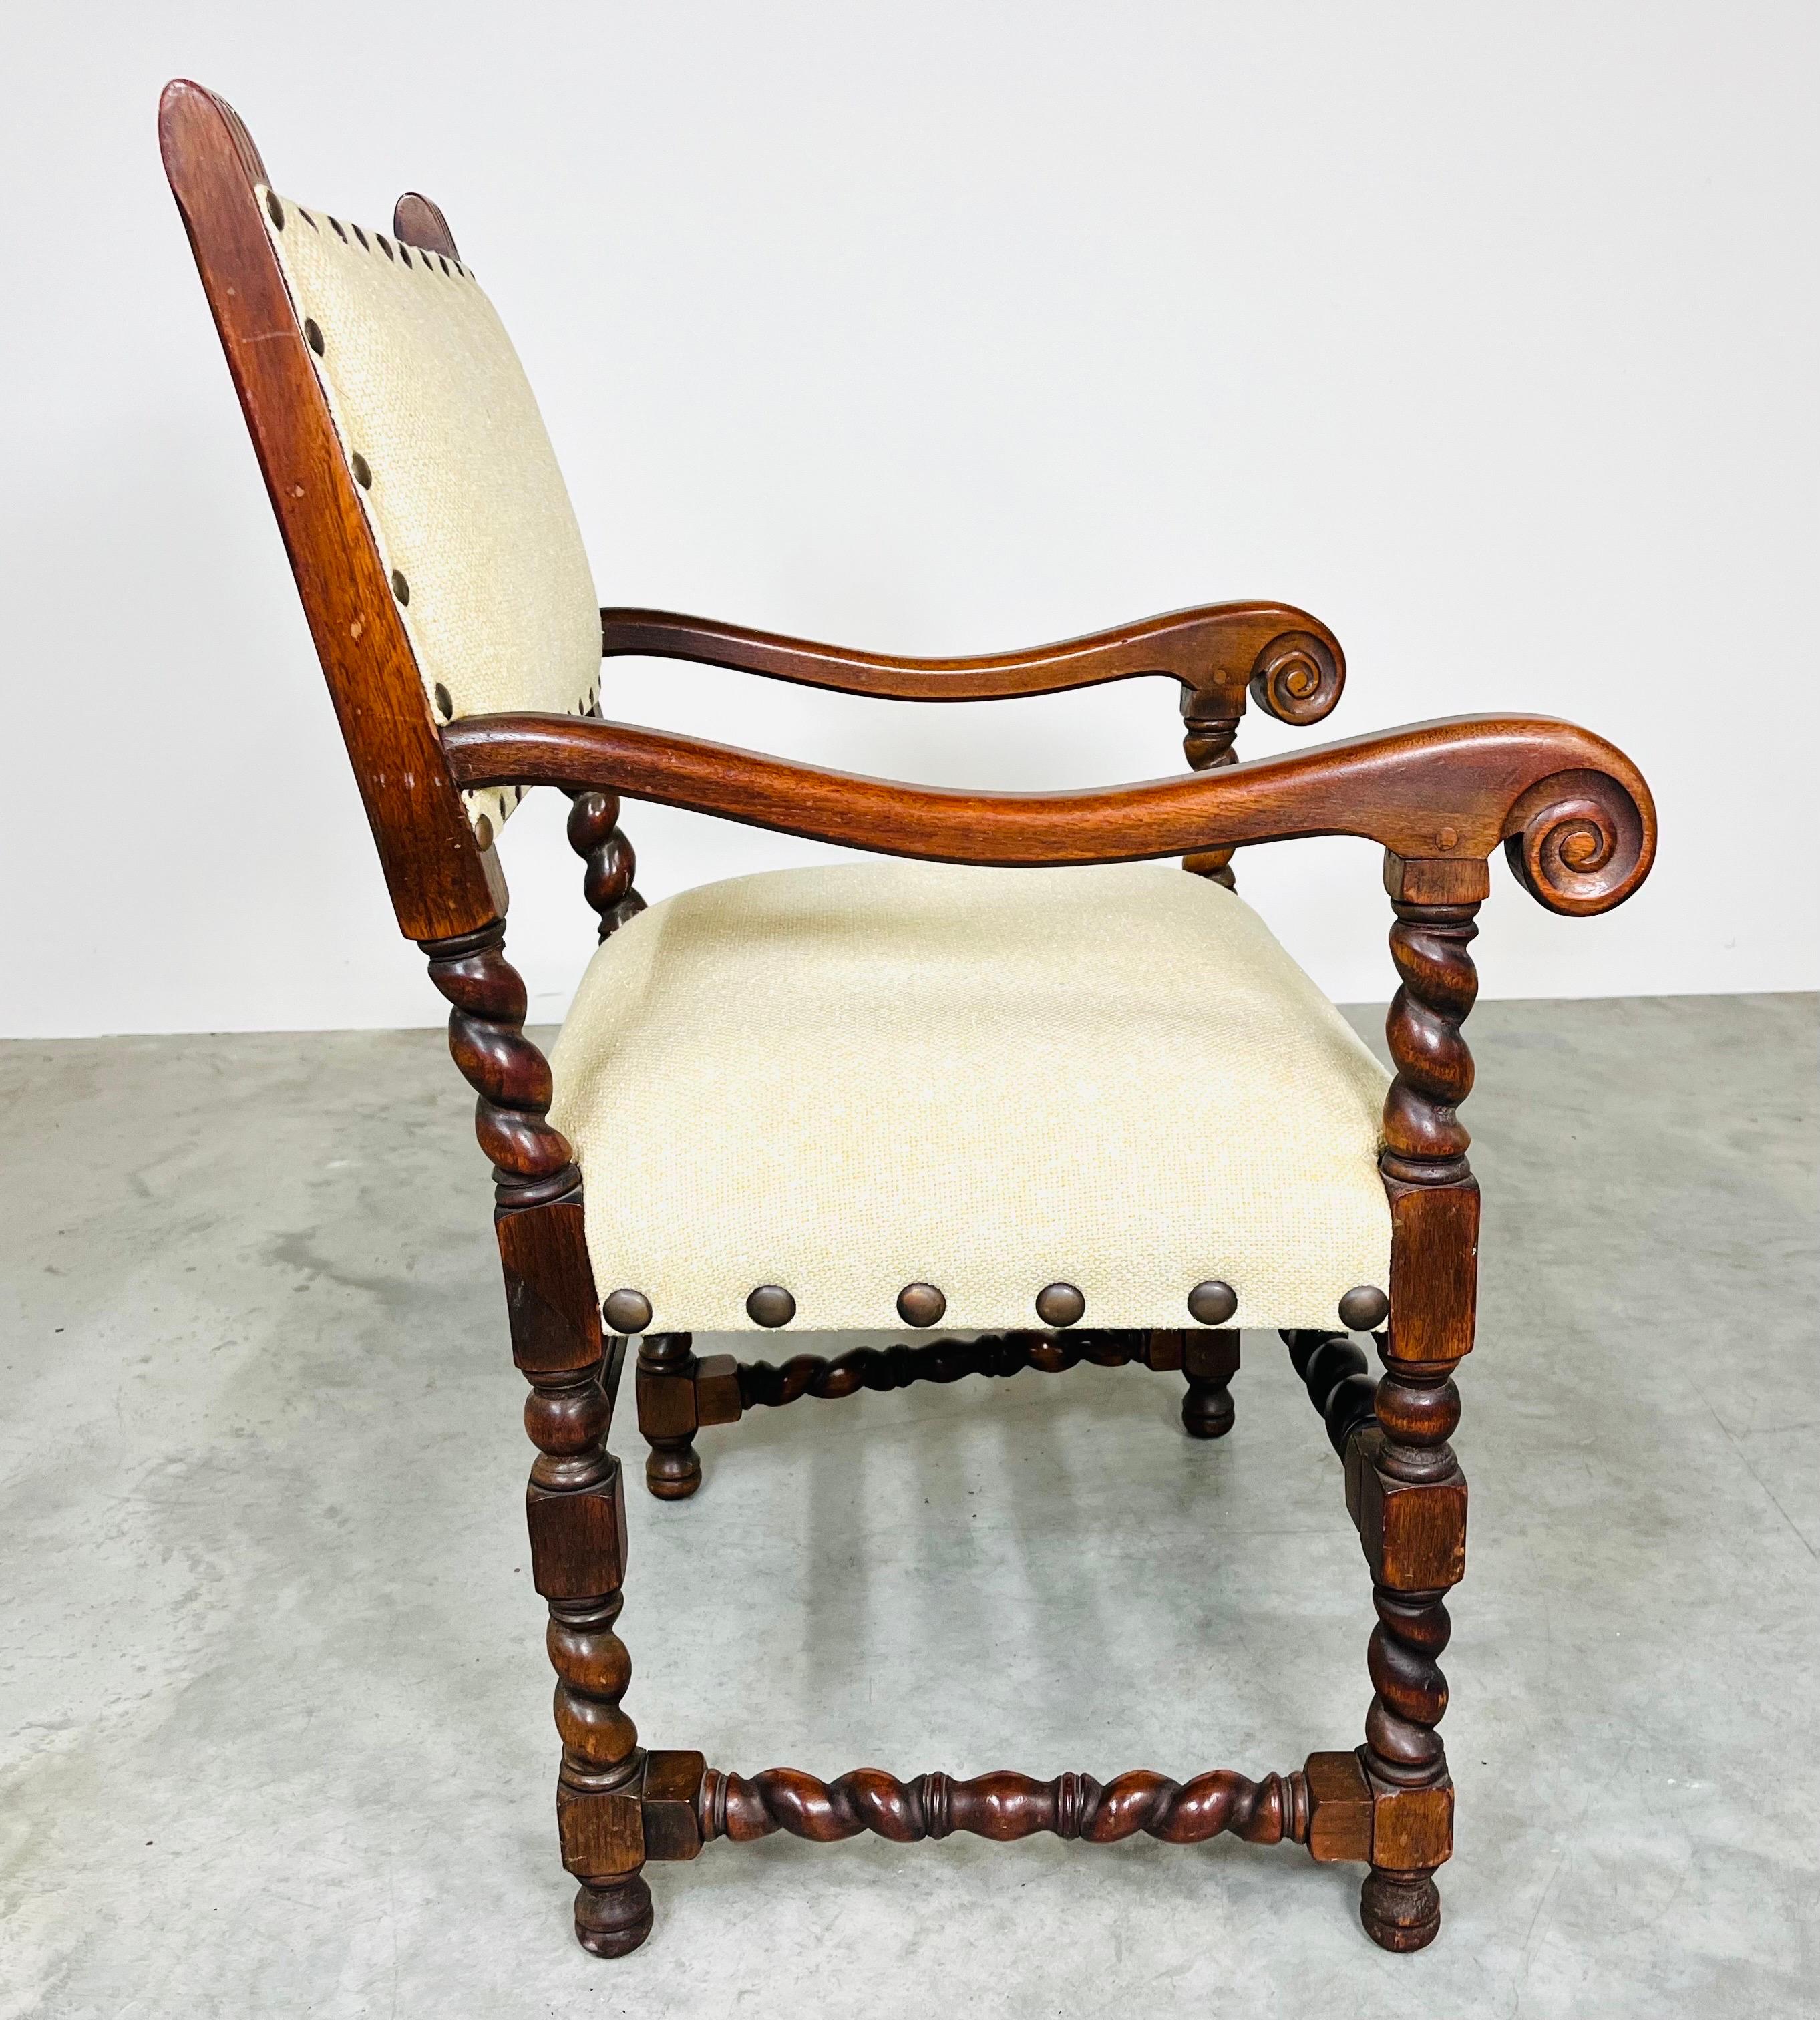 Hand-Carved Jacobean Walnut Barley Twist Arm Chair by Kittinger 19th Century For Sale